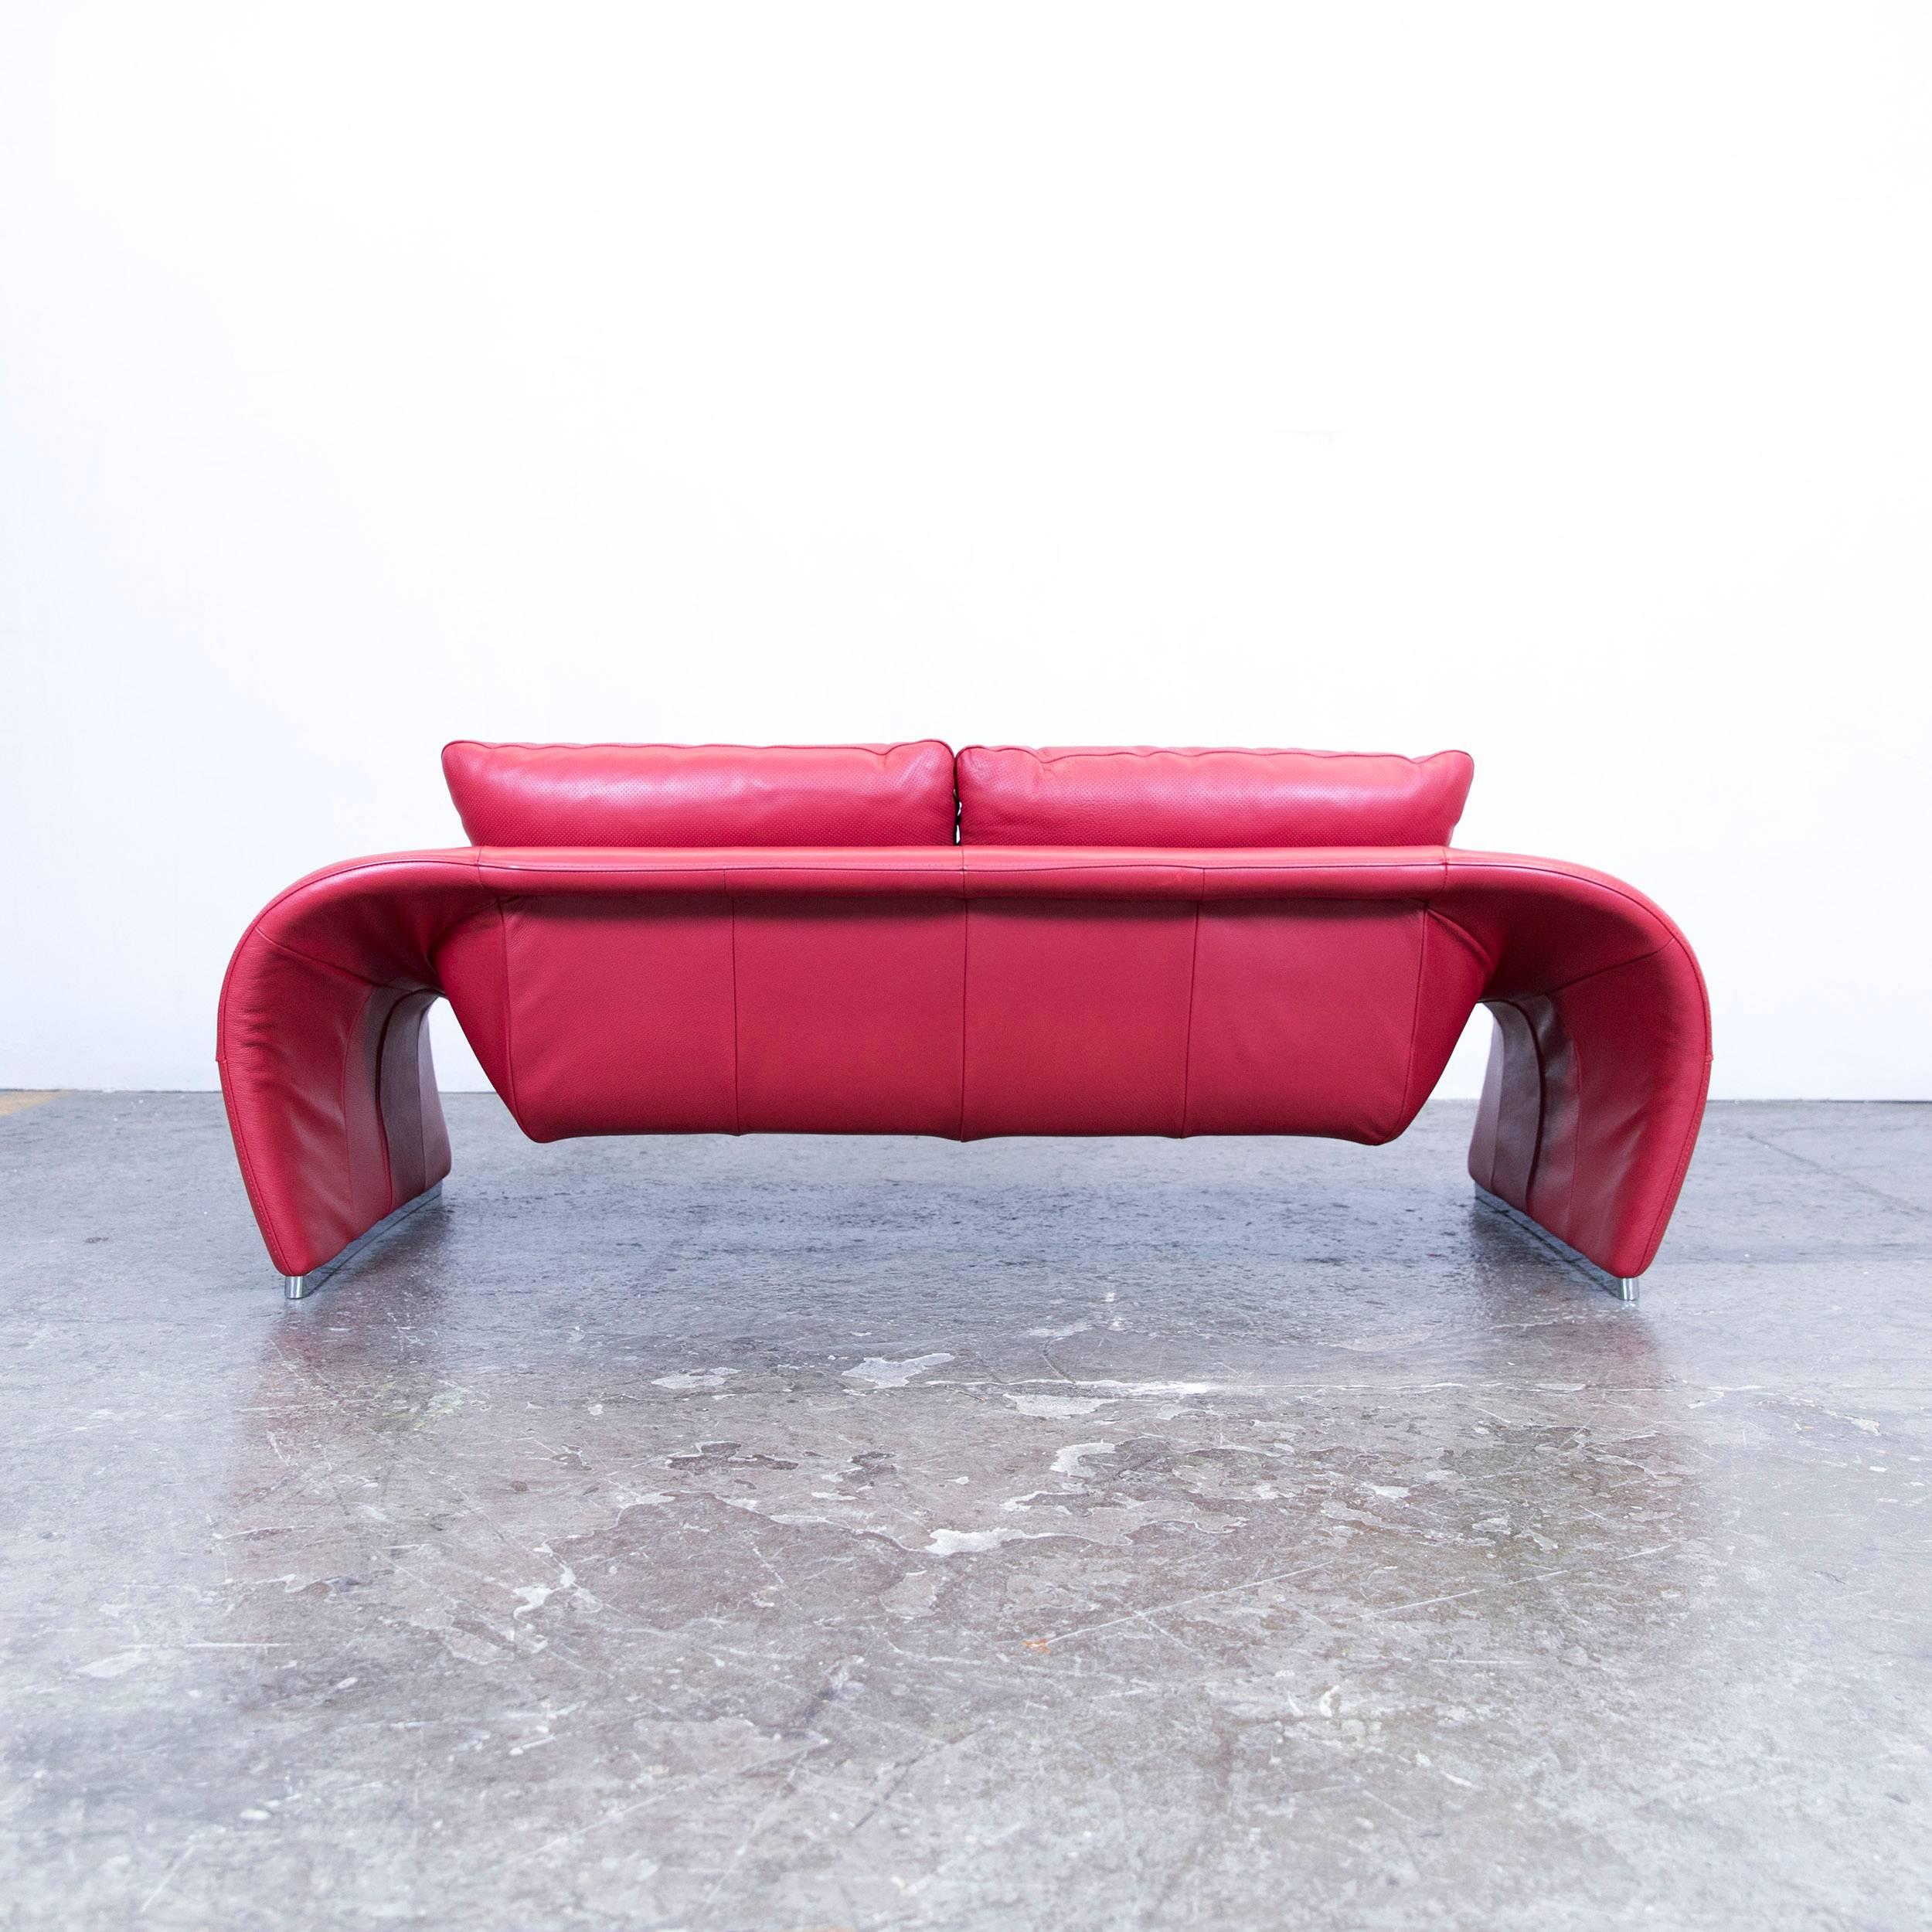 Chateau d'Ax Voga Designer Sofa Leather Red Three-Seat Function Couch Modern 1